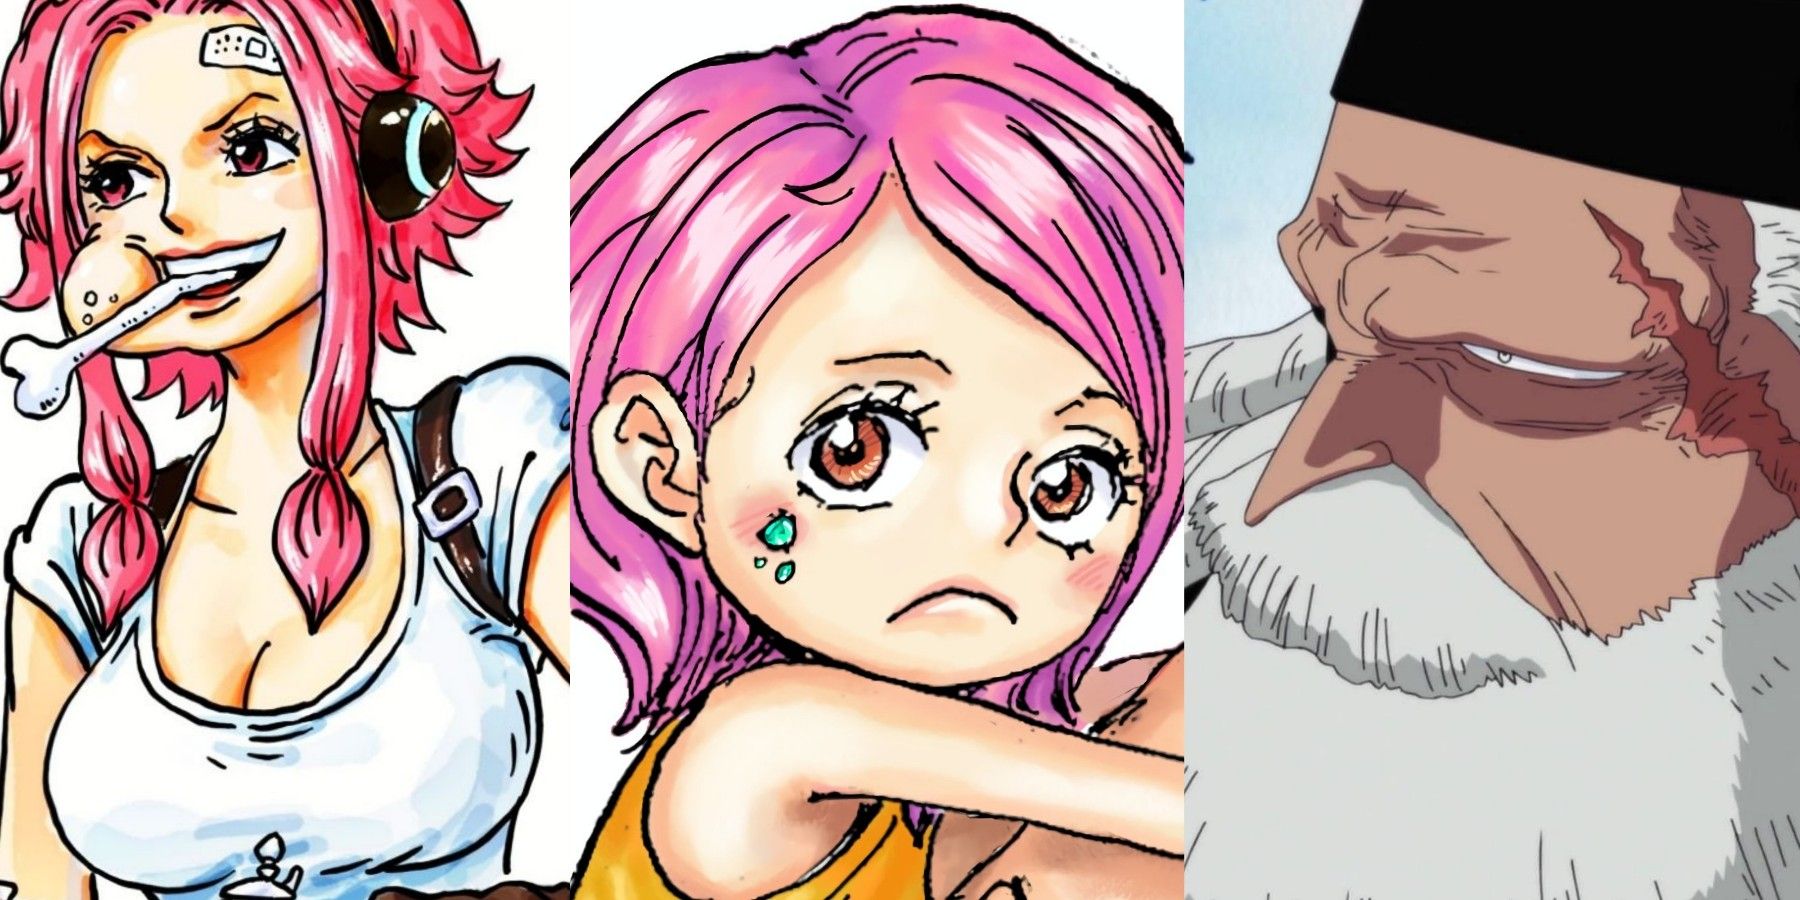 featured one piece what is sapphire scale disease Bonney